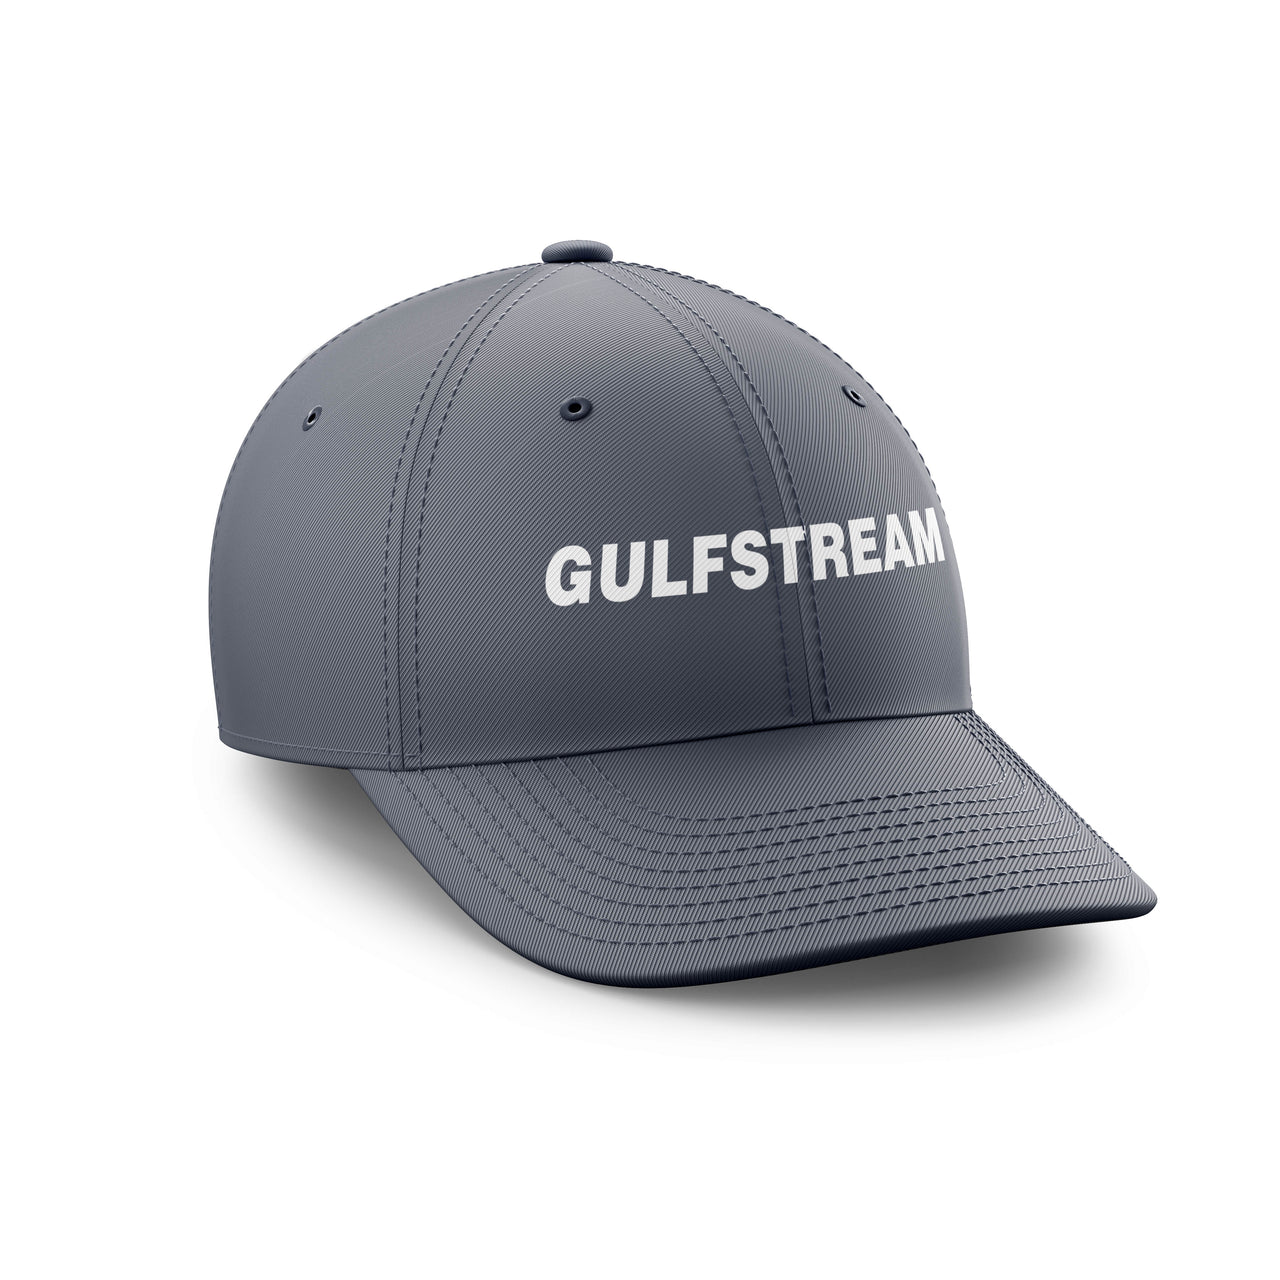 Gulfstream & Text Designed Embroidered Hats